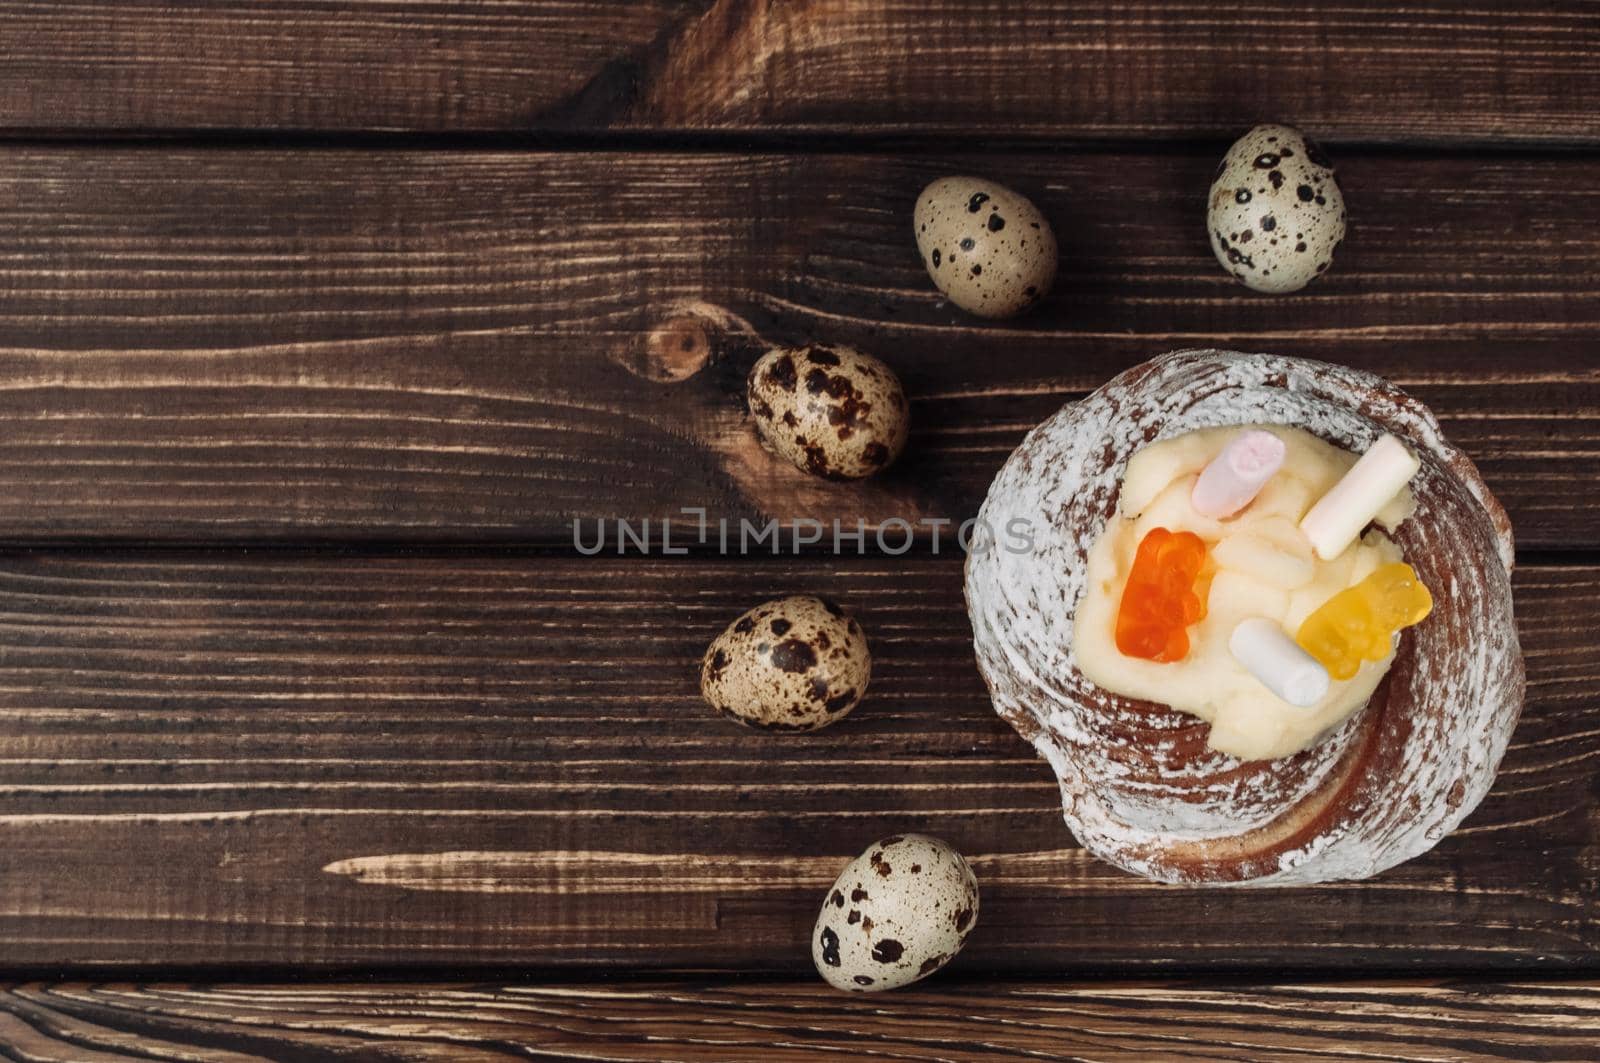 Stylish Easter cake with marshmallows and jelly bears on a dark rustic wooden background, quail eggs lie nearby. Seasonal Greetings Happy Easter. copy space. view from above. modern happy easter image